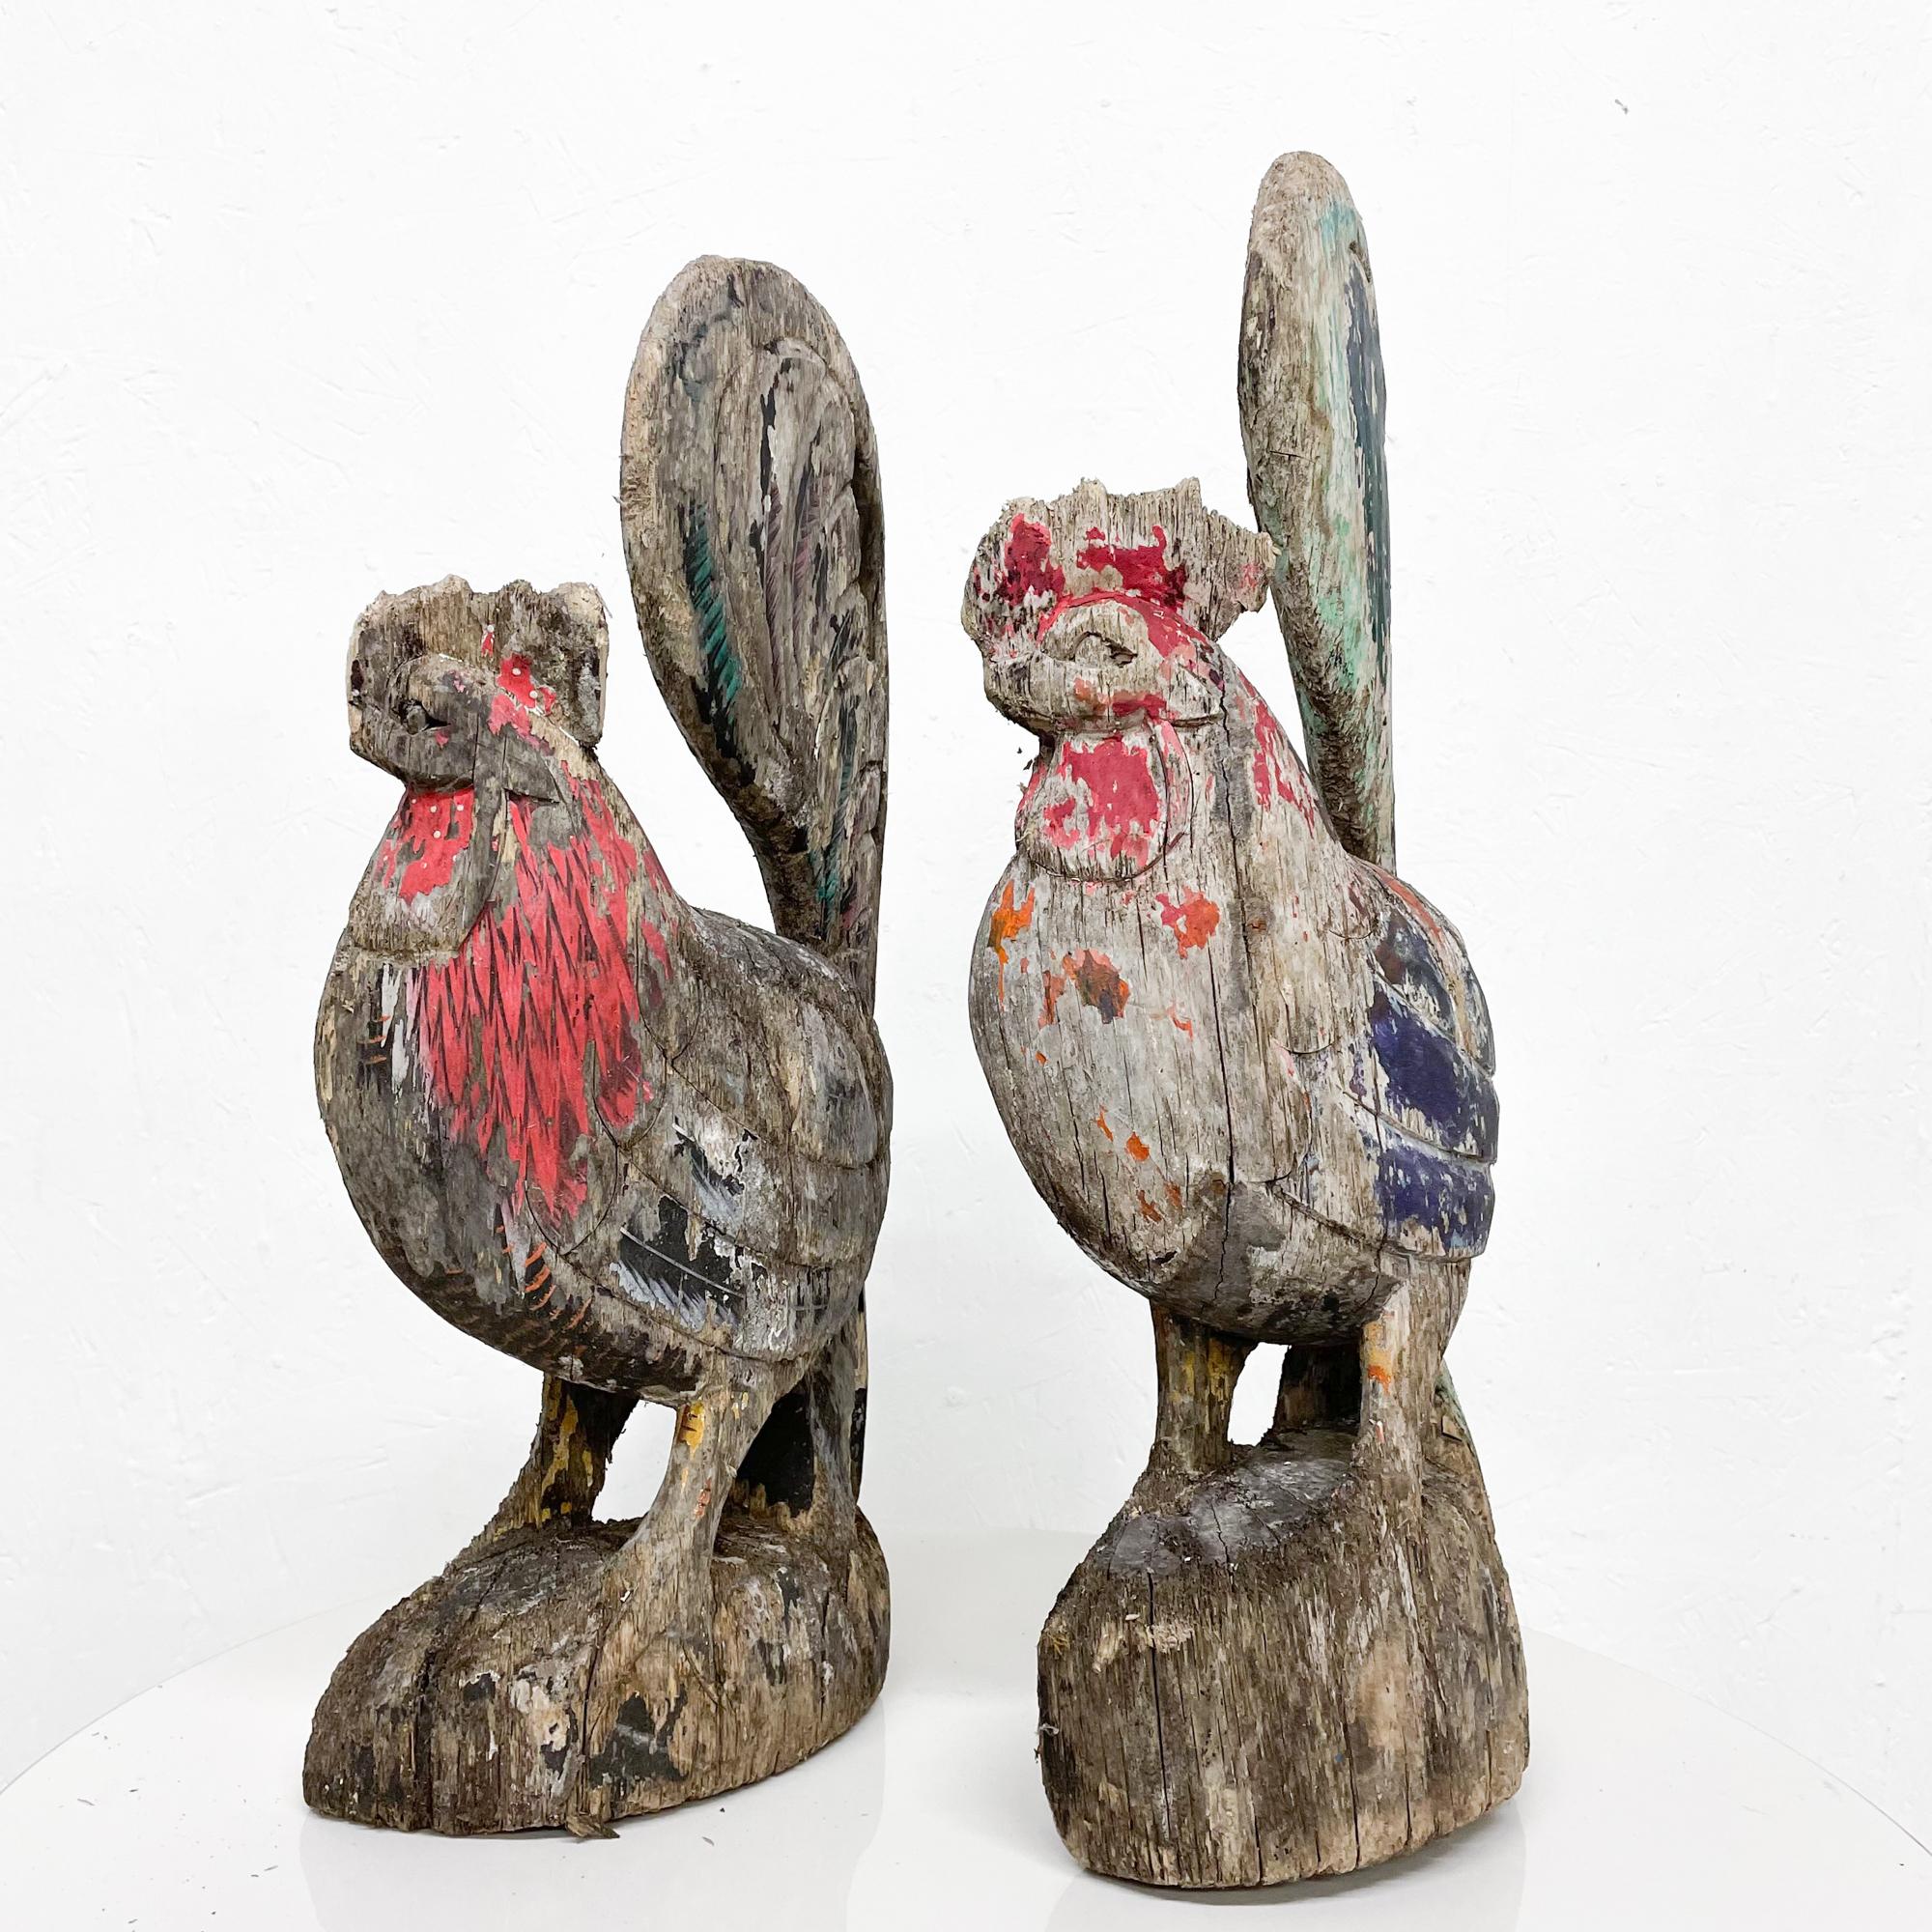 For your consideration a pair of wooden rooster sculptures.
Fair condition, signs of vintage wear present.
Unsure of place of manufacture or year of production. Signs of original painted (sun faded).
Hand carved.
Dimensions: 21